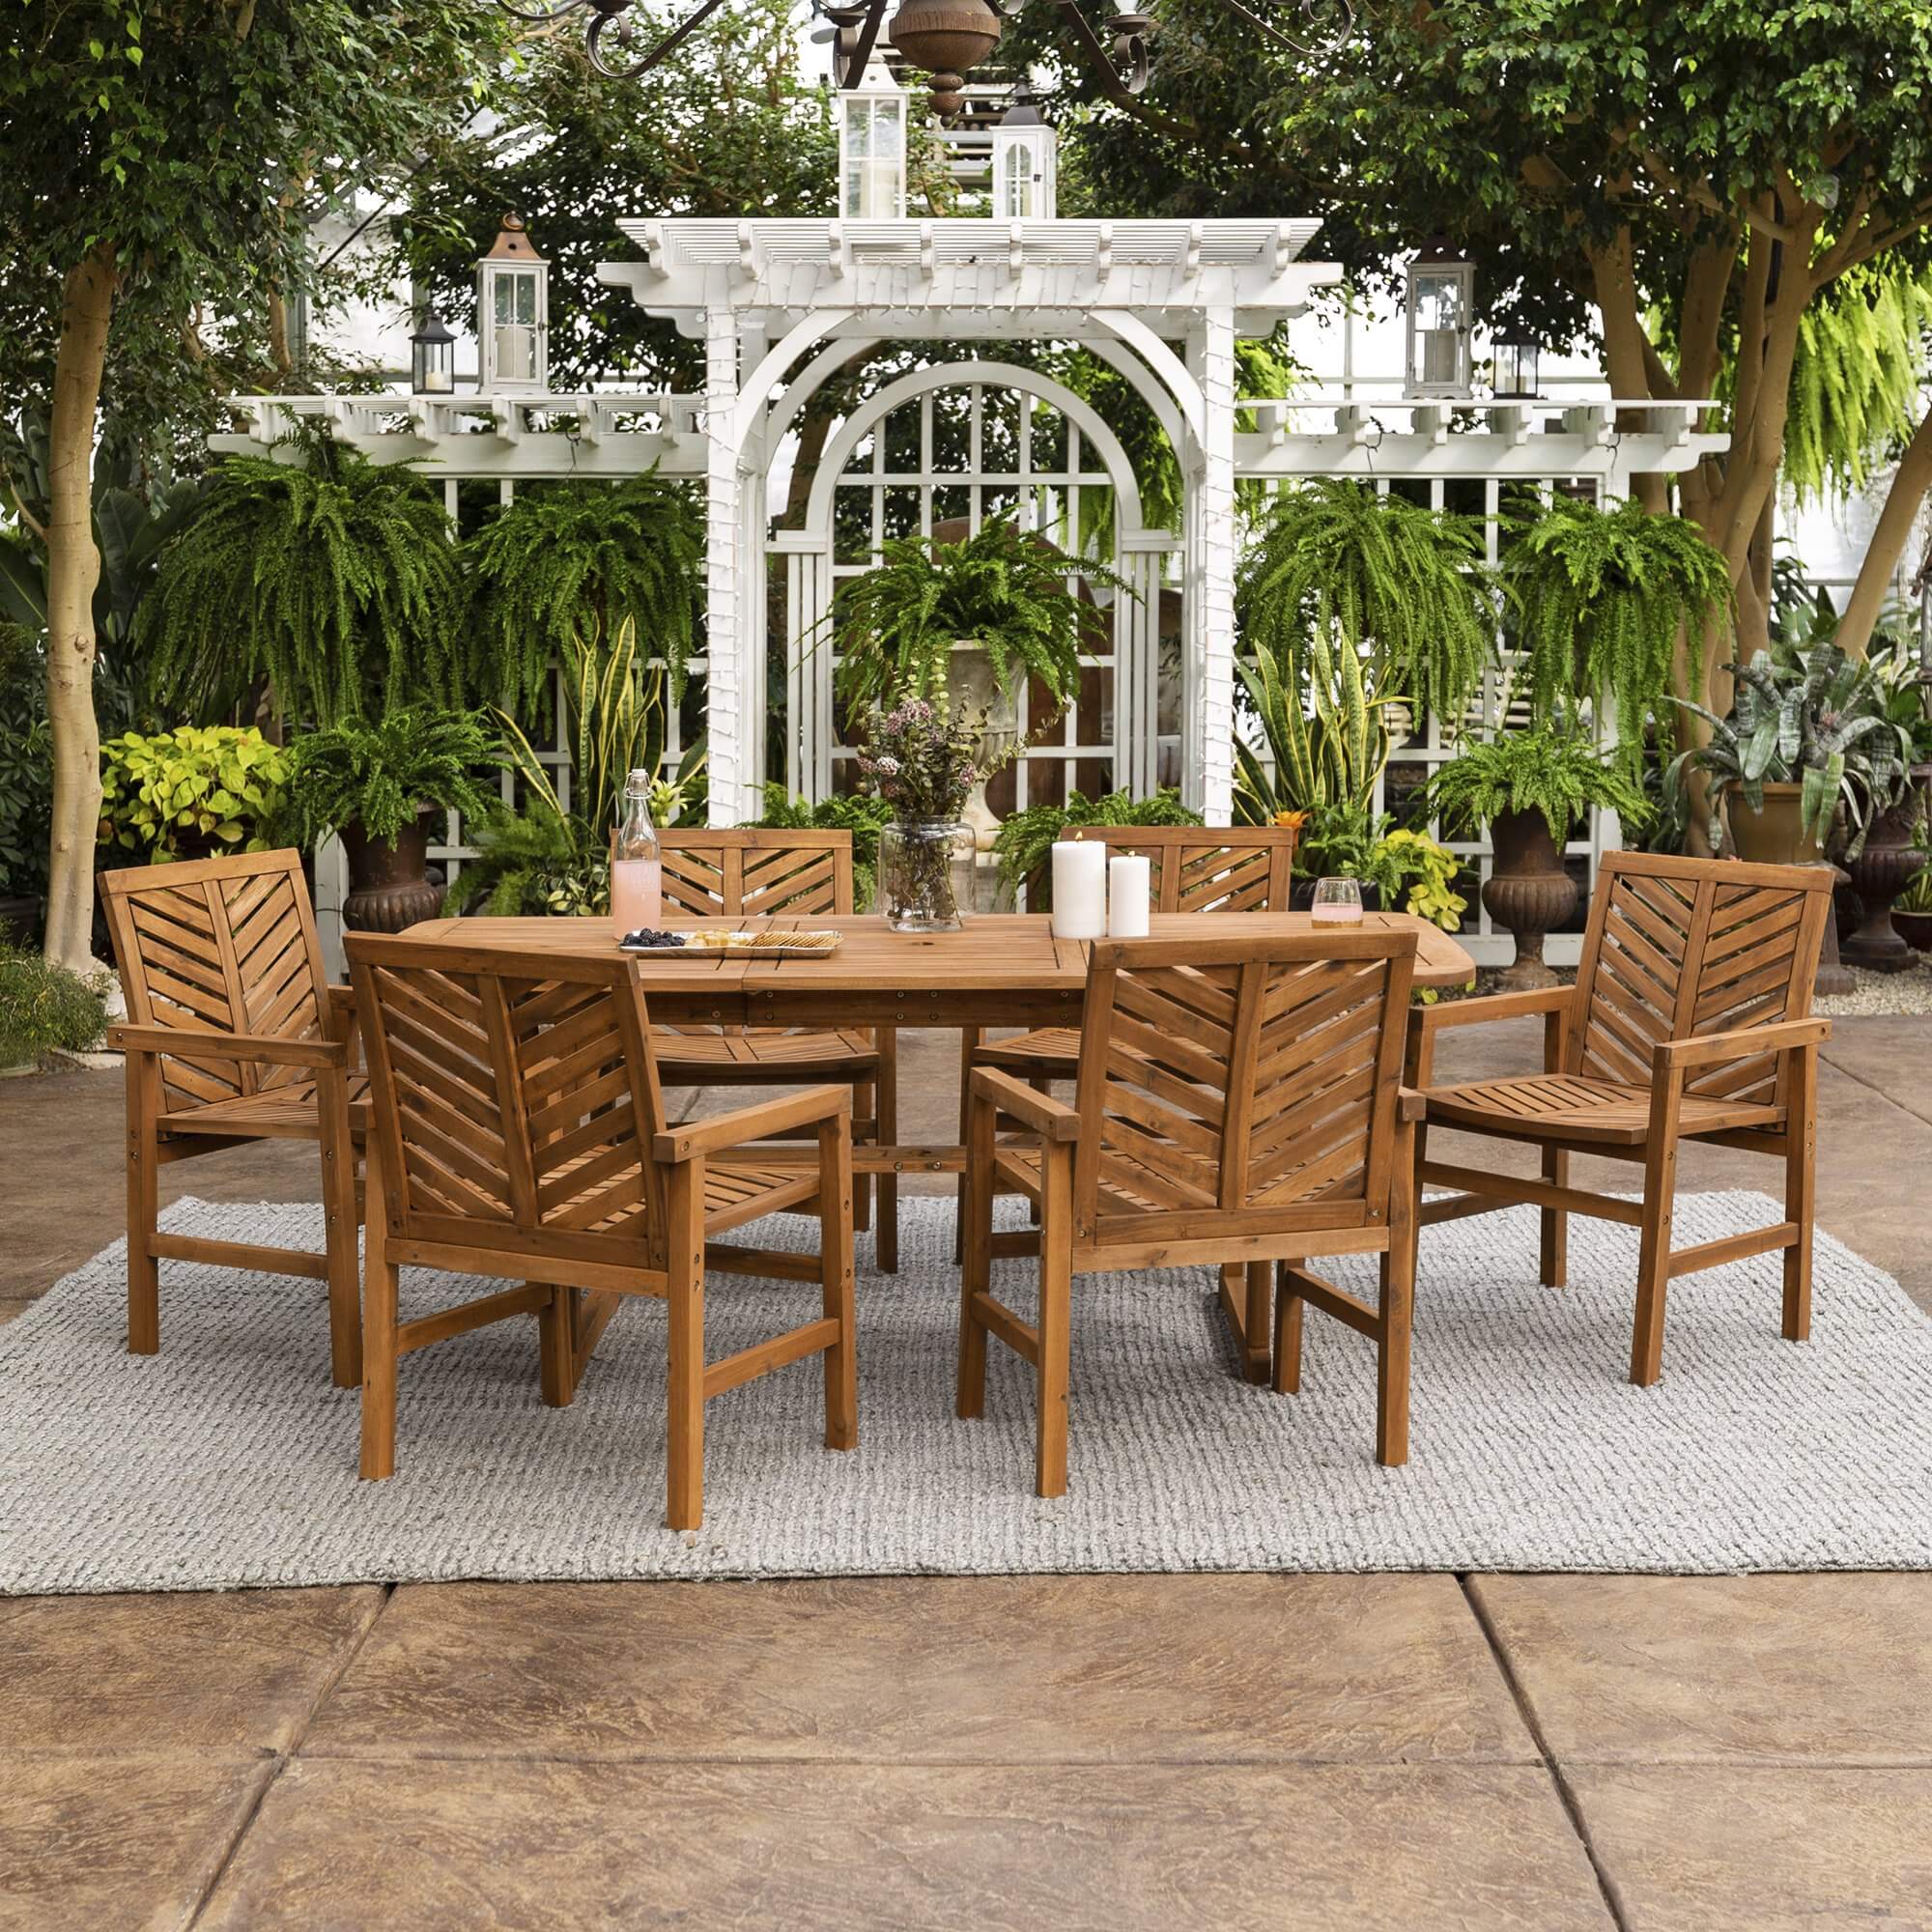 A wooden patio set with a table and chairs